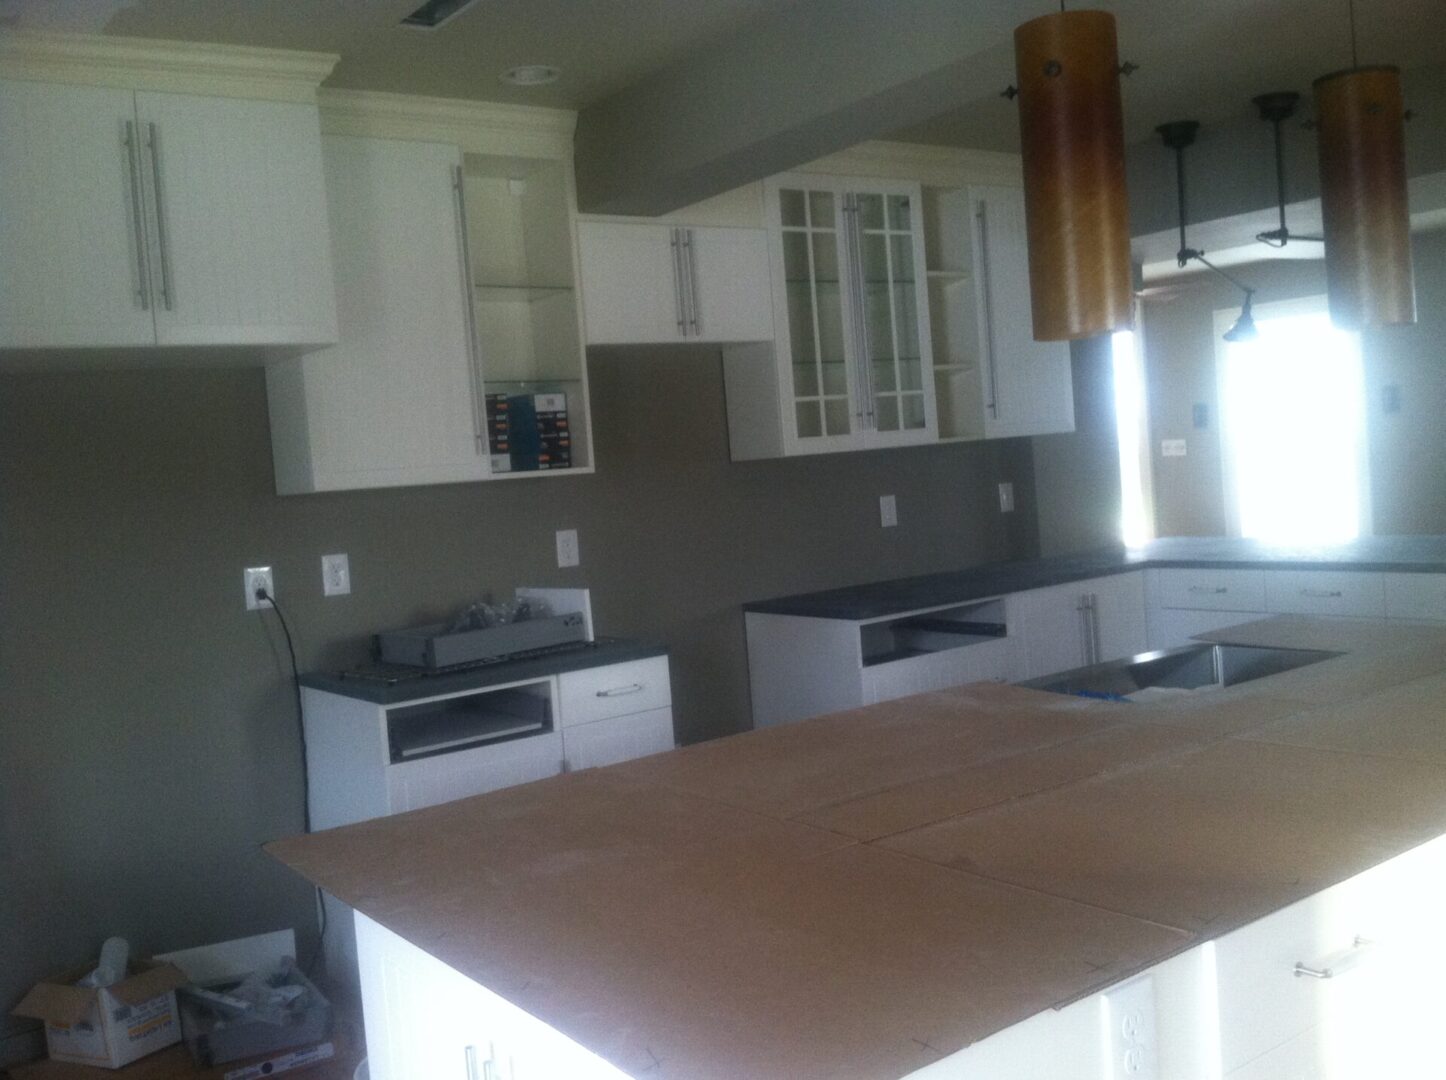 Grey-walled kitchen space with white cabinetry being constructed